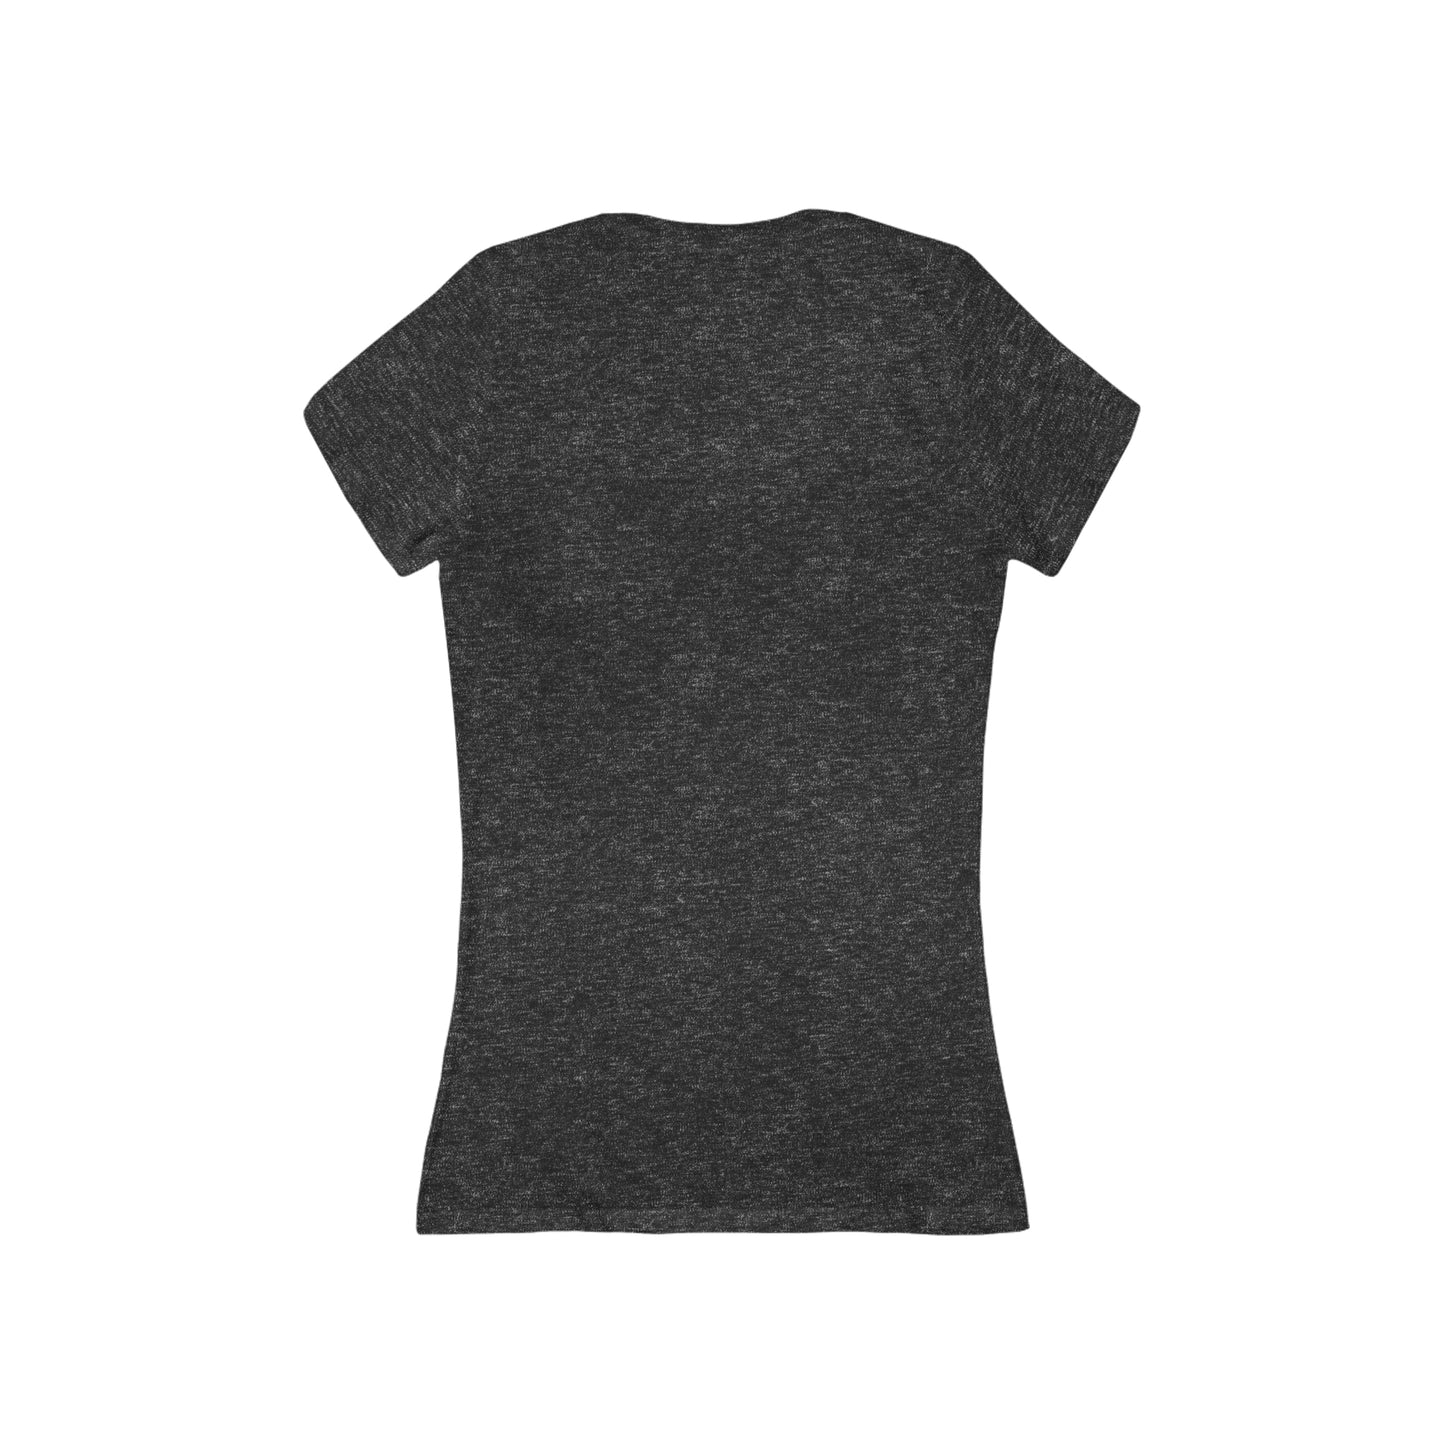 I have gray hair and a colorful vocabulary, short sleeve deep v-neck t-shirt, for women embracing silver and gray hair